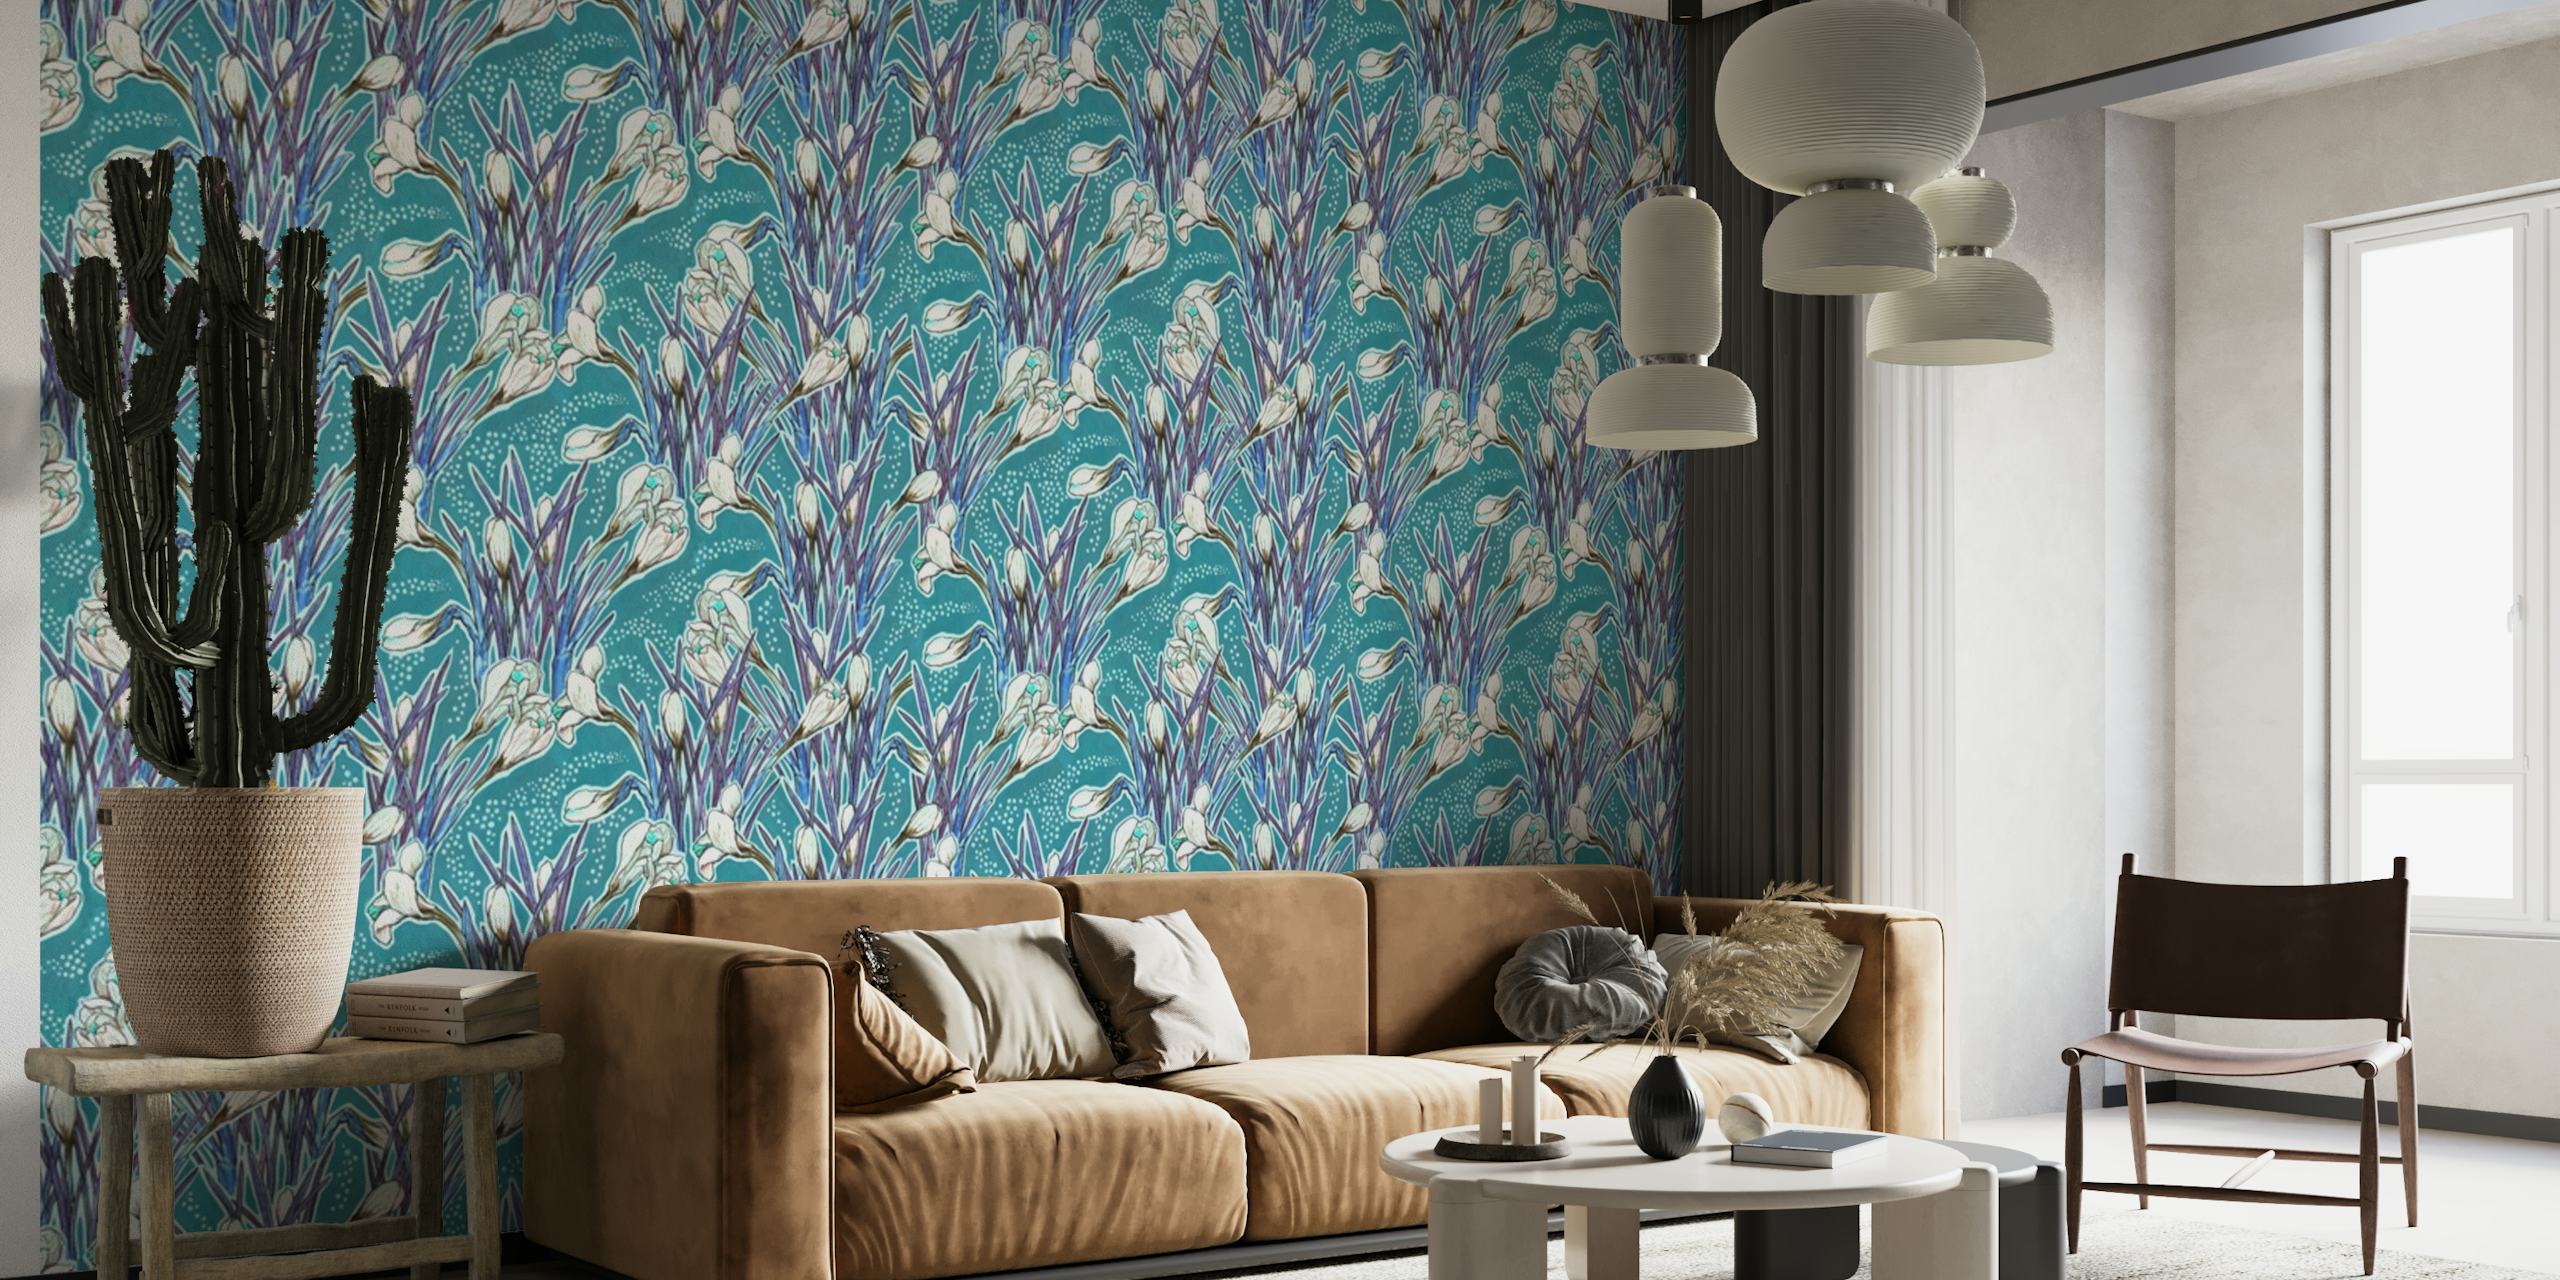 Crocuses Pattern Turquoise wall mural with symmetrical floral design on happywall.com